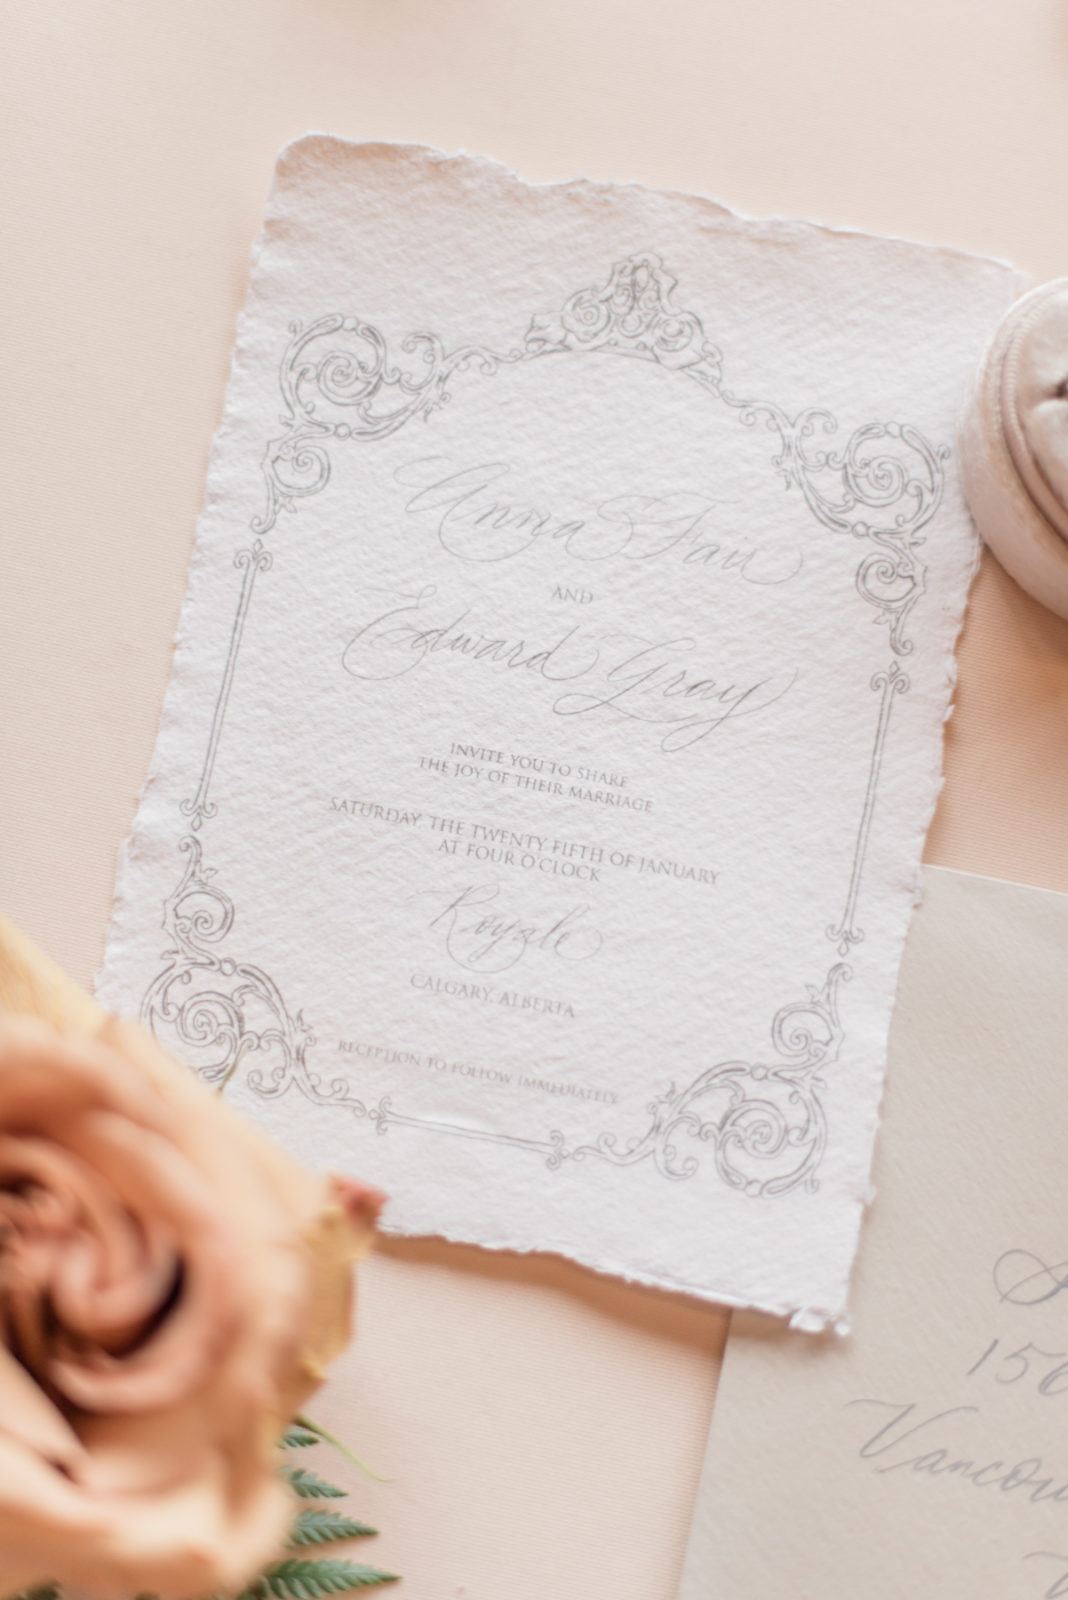 Romantically Regal Bridal Inspiration at the Royale YYC - wedding inspiration featured on Brontë Bride, wedding invitation, stationery, wedding invite